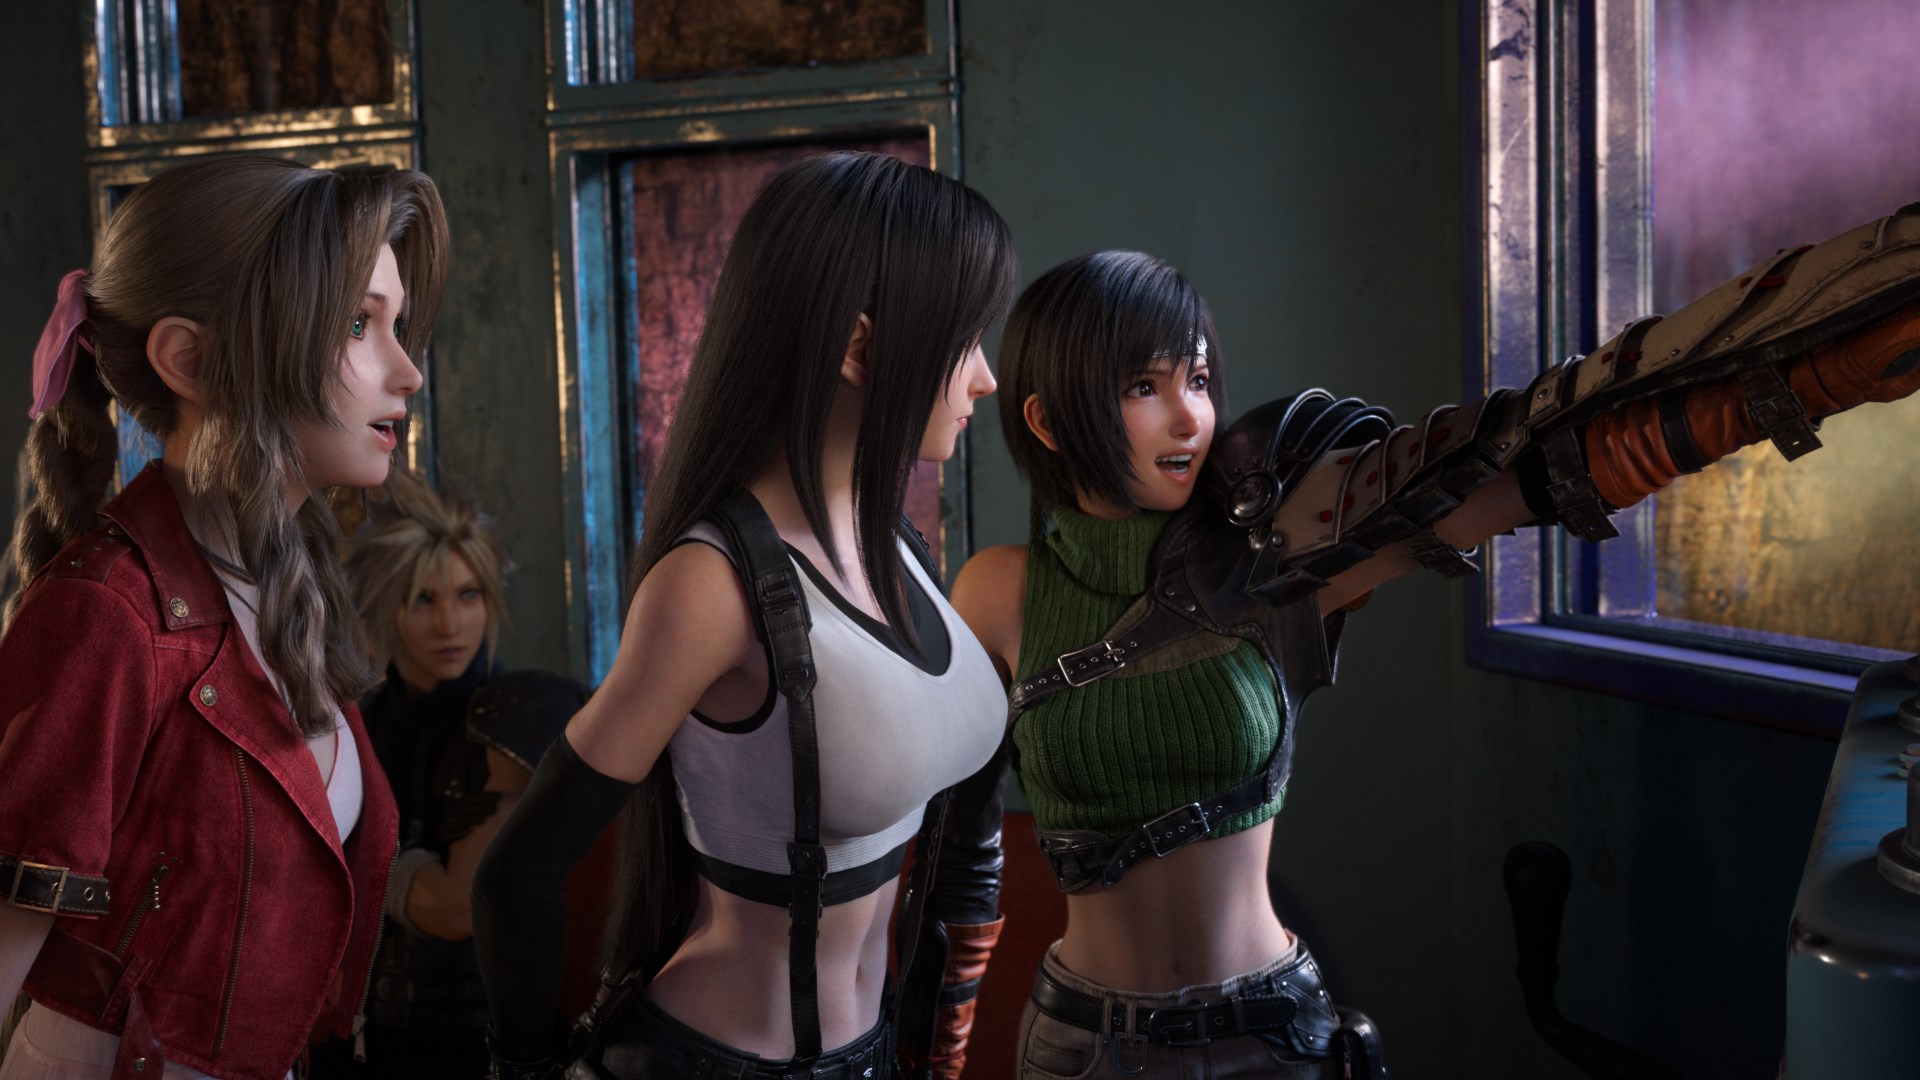 Final Fantasy VII: Fans Get Their Reboot After Years of